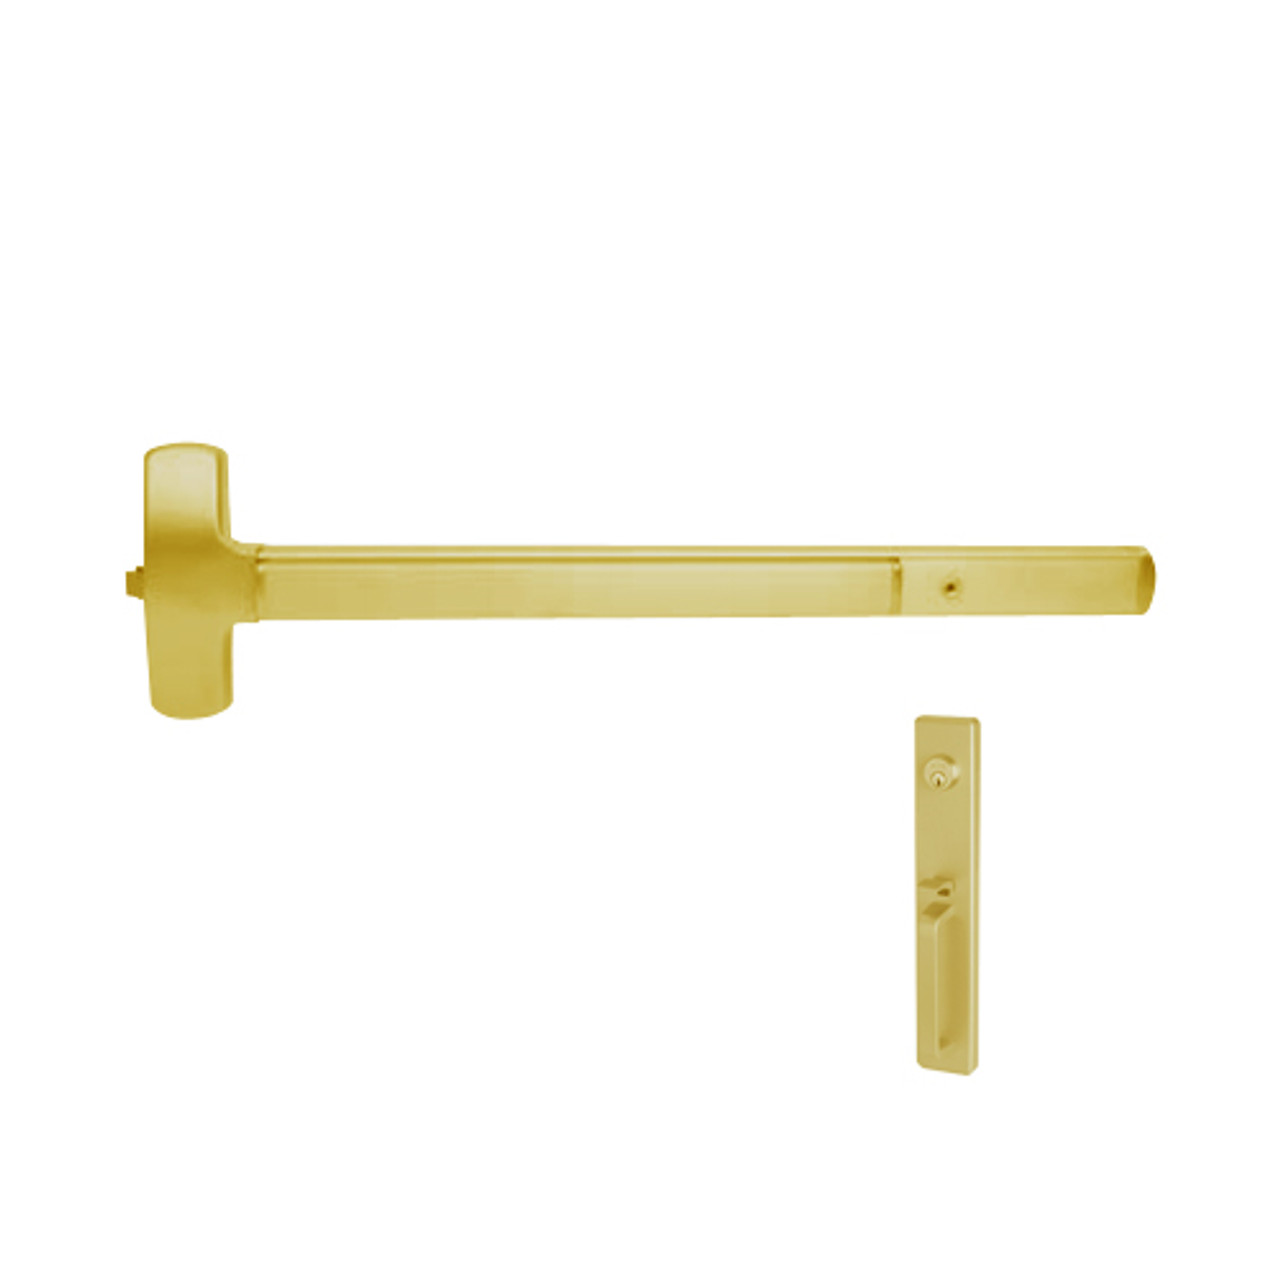 25-R-TP-US3-3 Falcon Exit Device in Polished Brass